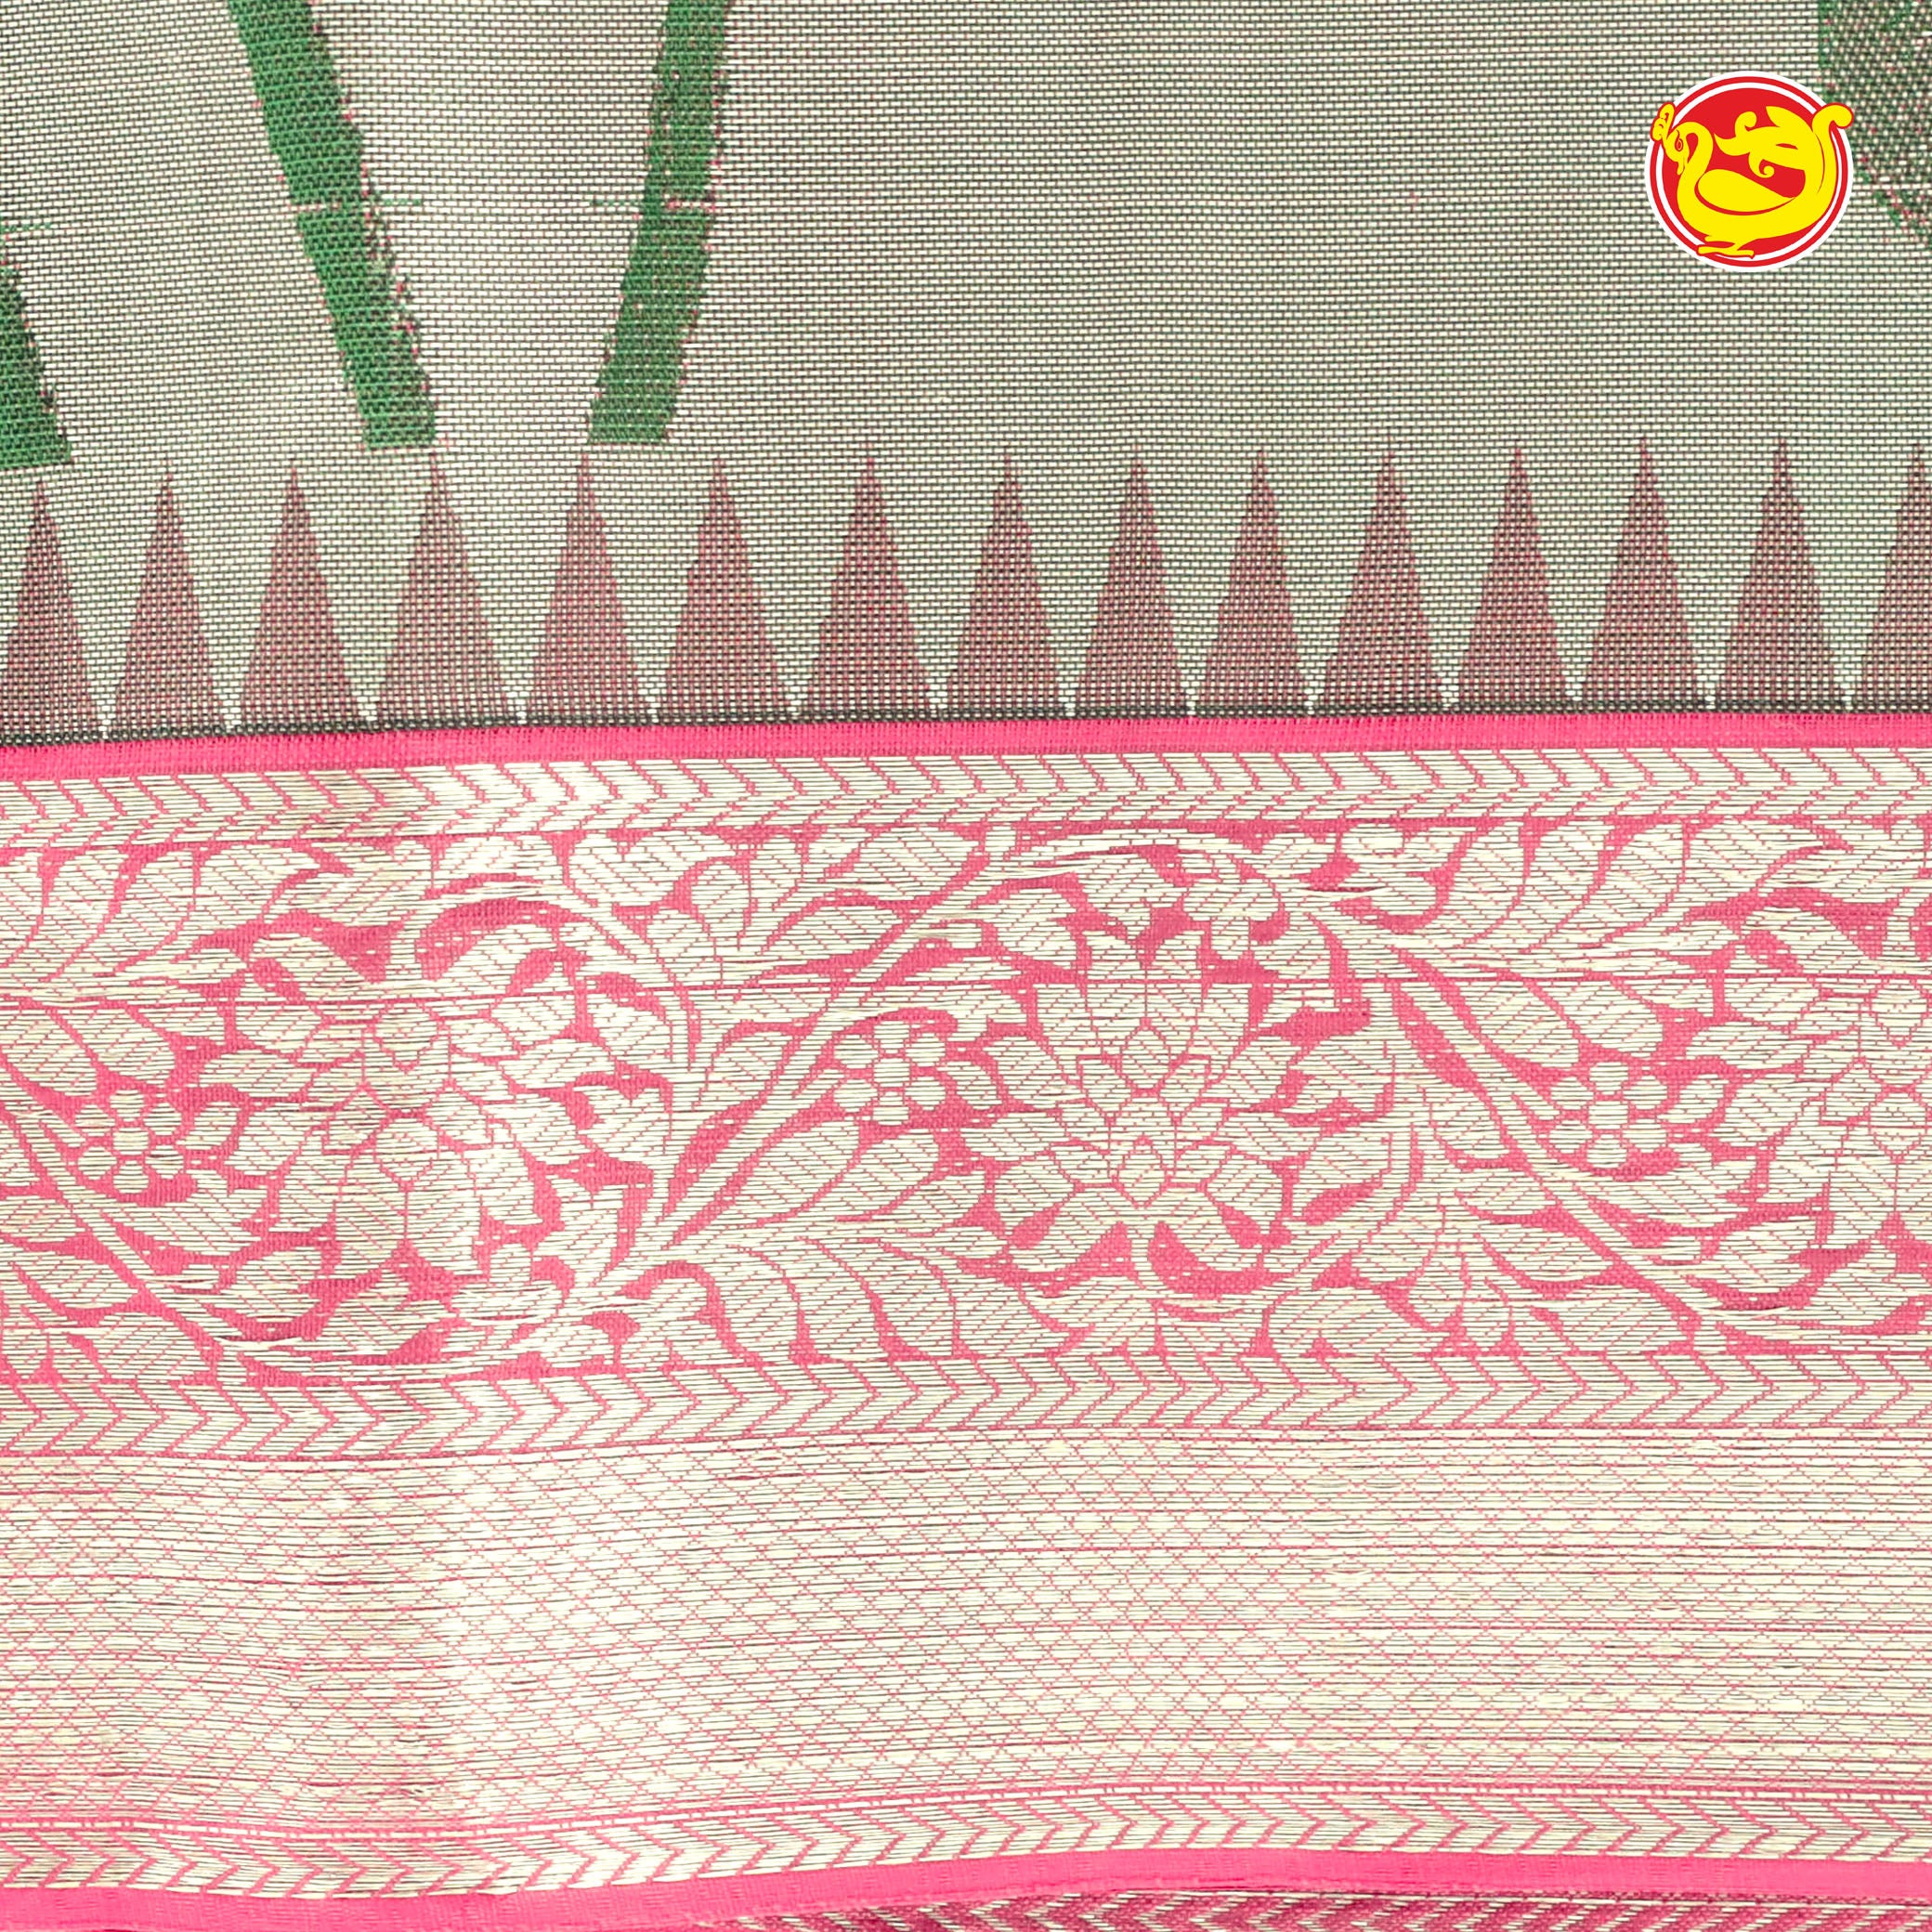 Grey with pink pure silk saree with woven lotus motifs in a raising pattern